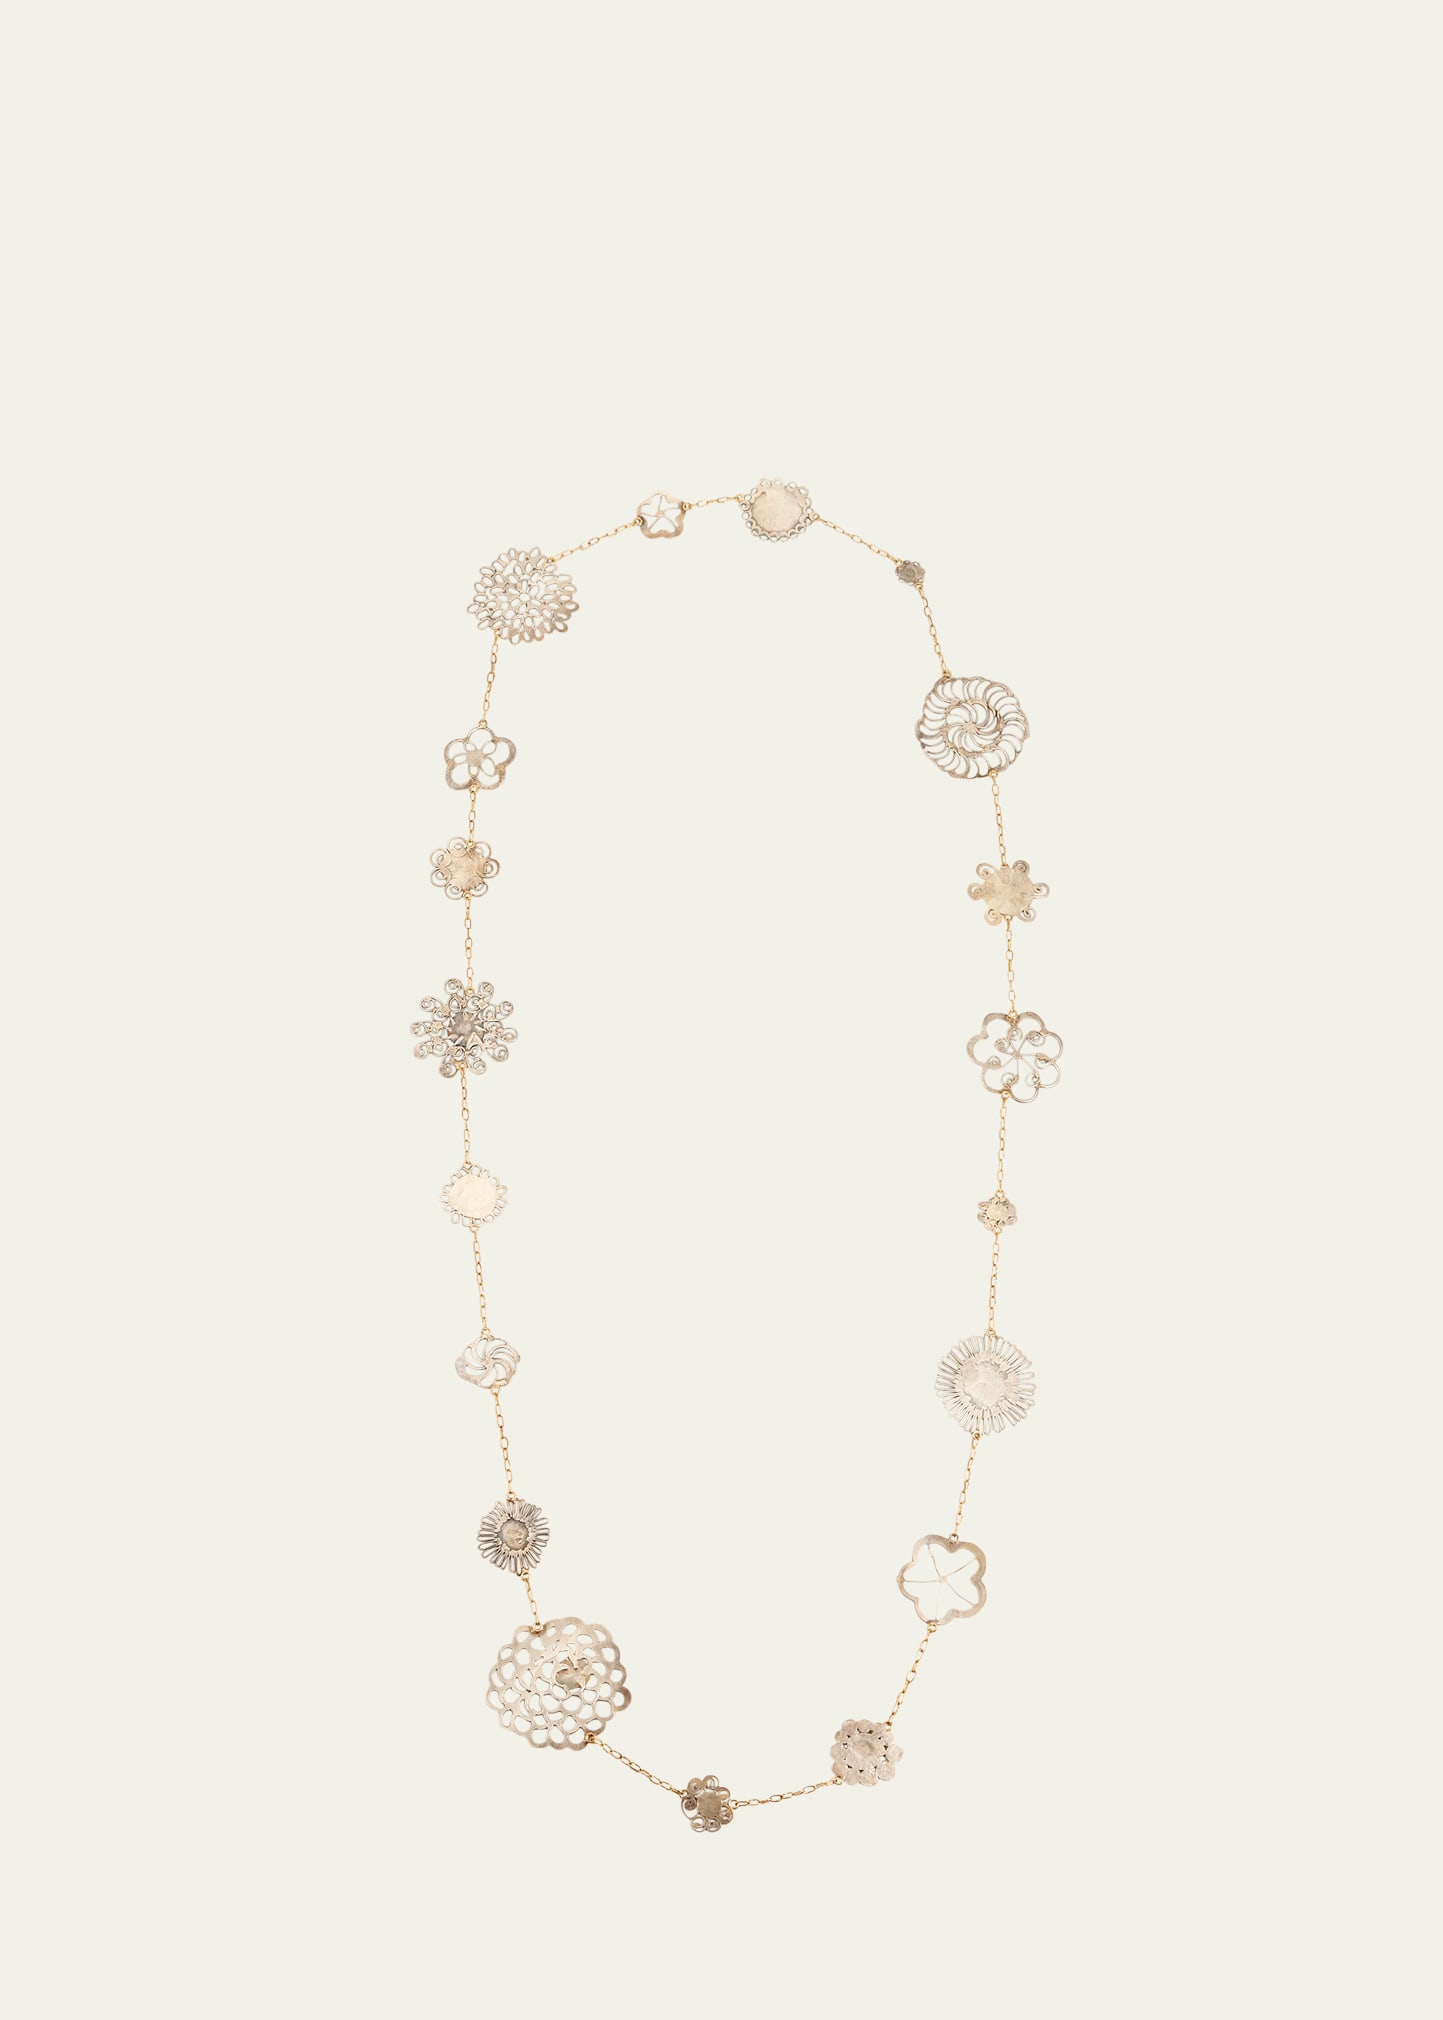 18K Yellow Gold and Silver Erewhon Long Flowery Necklace, 39"L